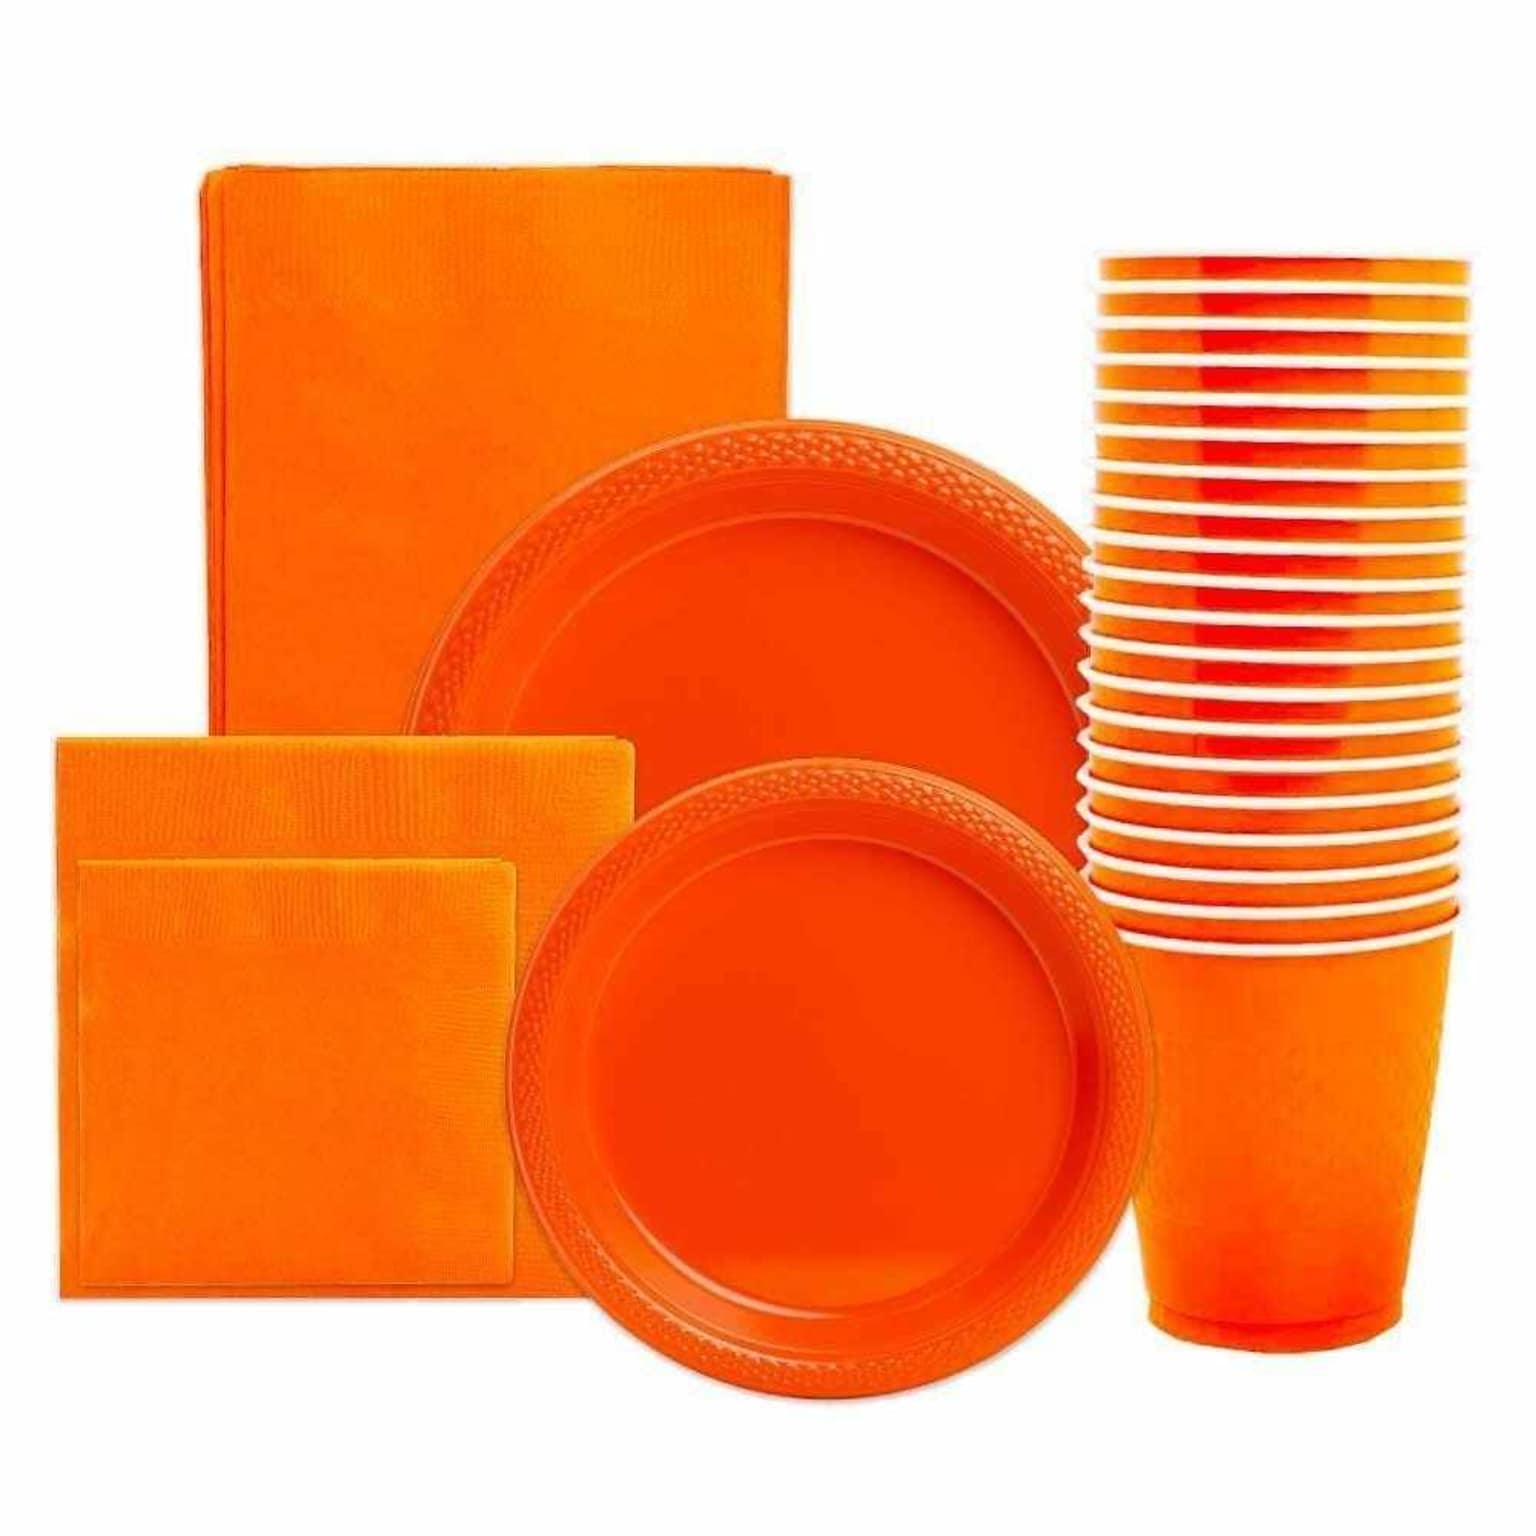 JAM PAPER Party Supply Assortment, Orange, Plates, Napkins, Cups & Tablecloth, 6/Pack (255PPORGS)